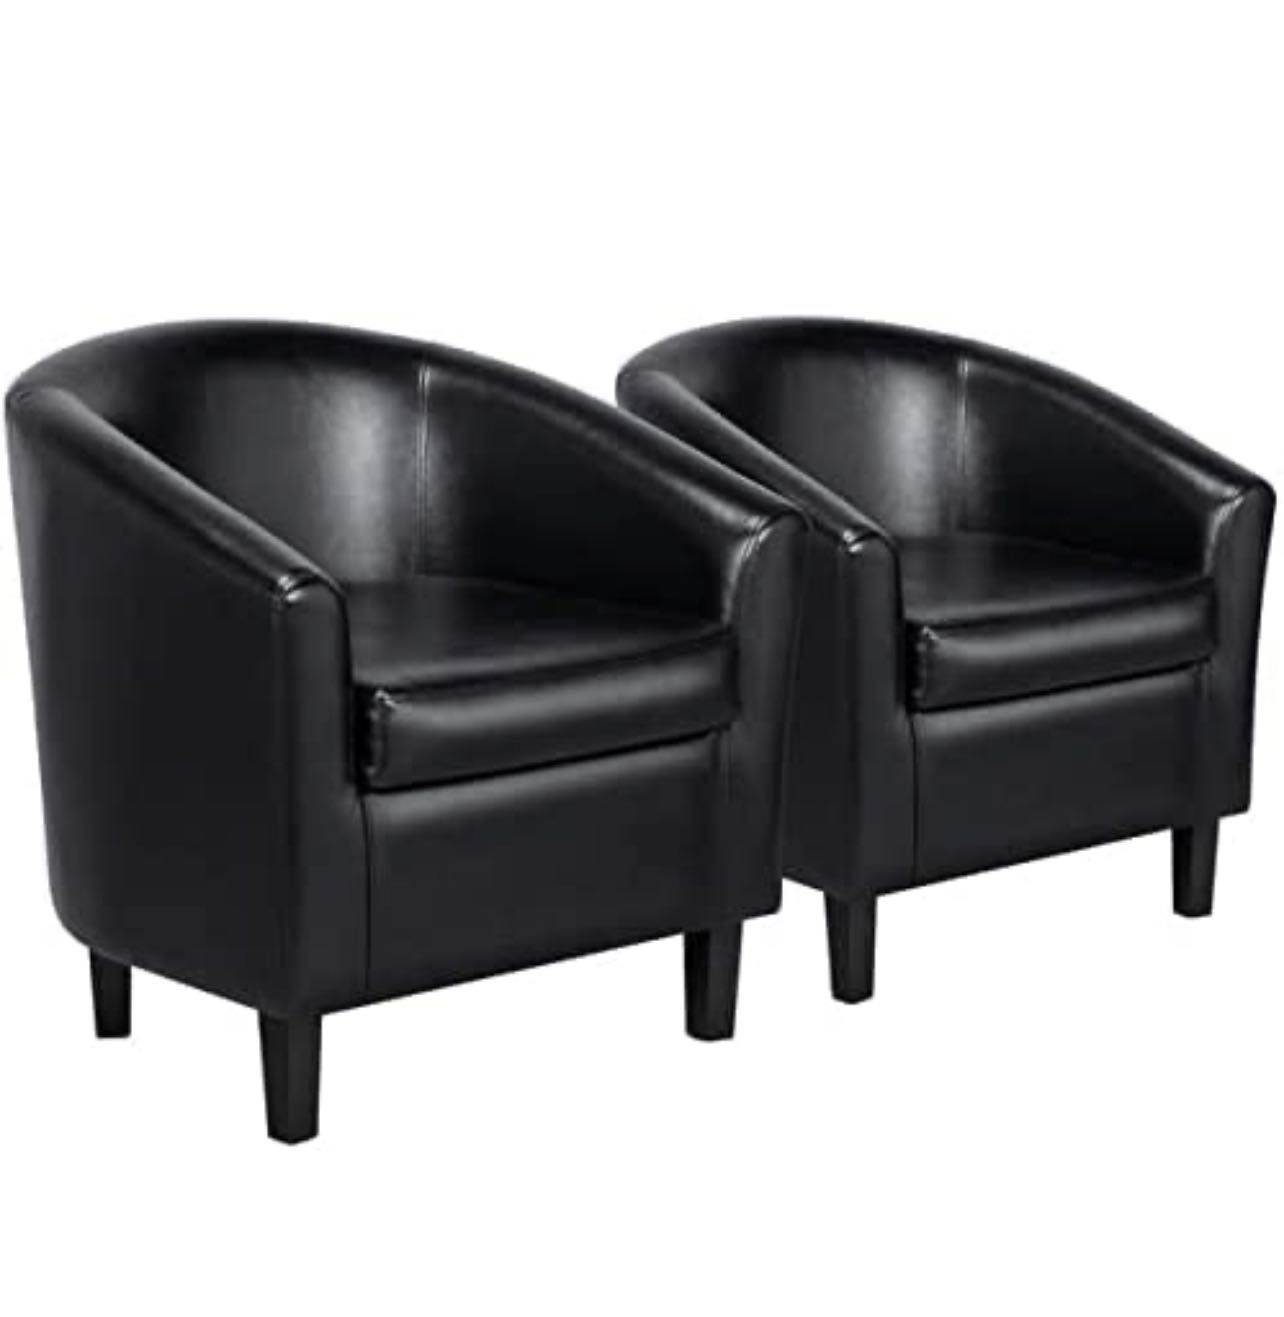  Chair, Faux Leather Armchairs Comfy Club Chairs Modern Accent Chair with Soft Seat for Living Room Bedroom Reading Room Waiting Room, Black, Set of 2